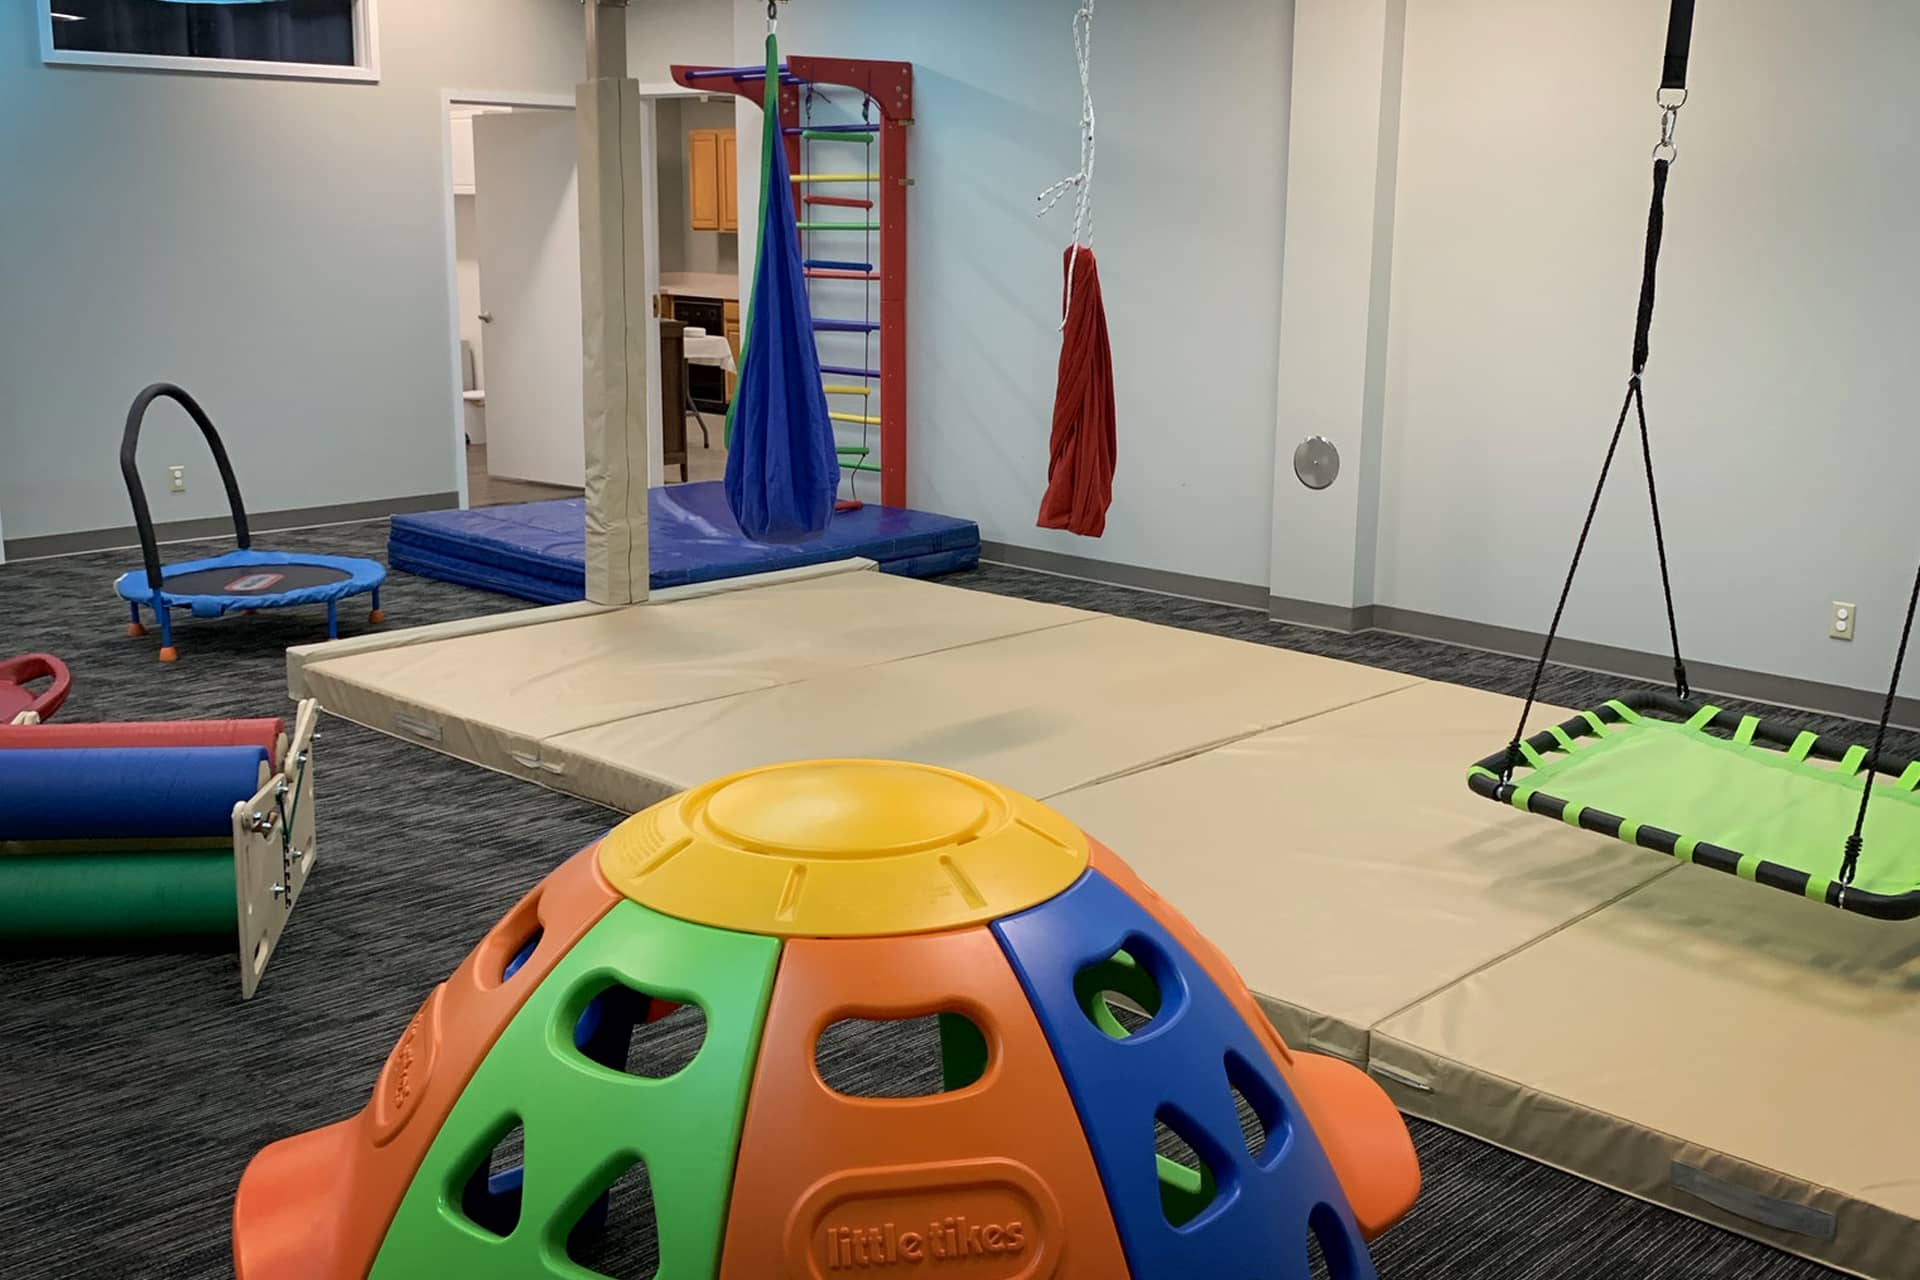 The open gym at the Superhero Center for Autism